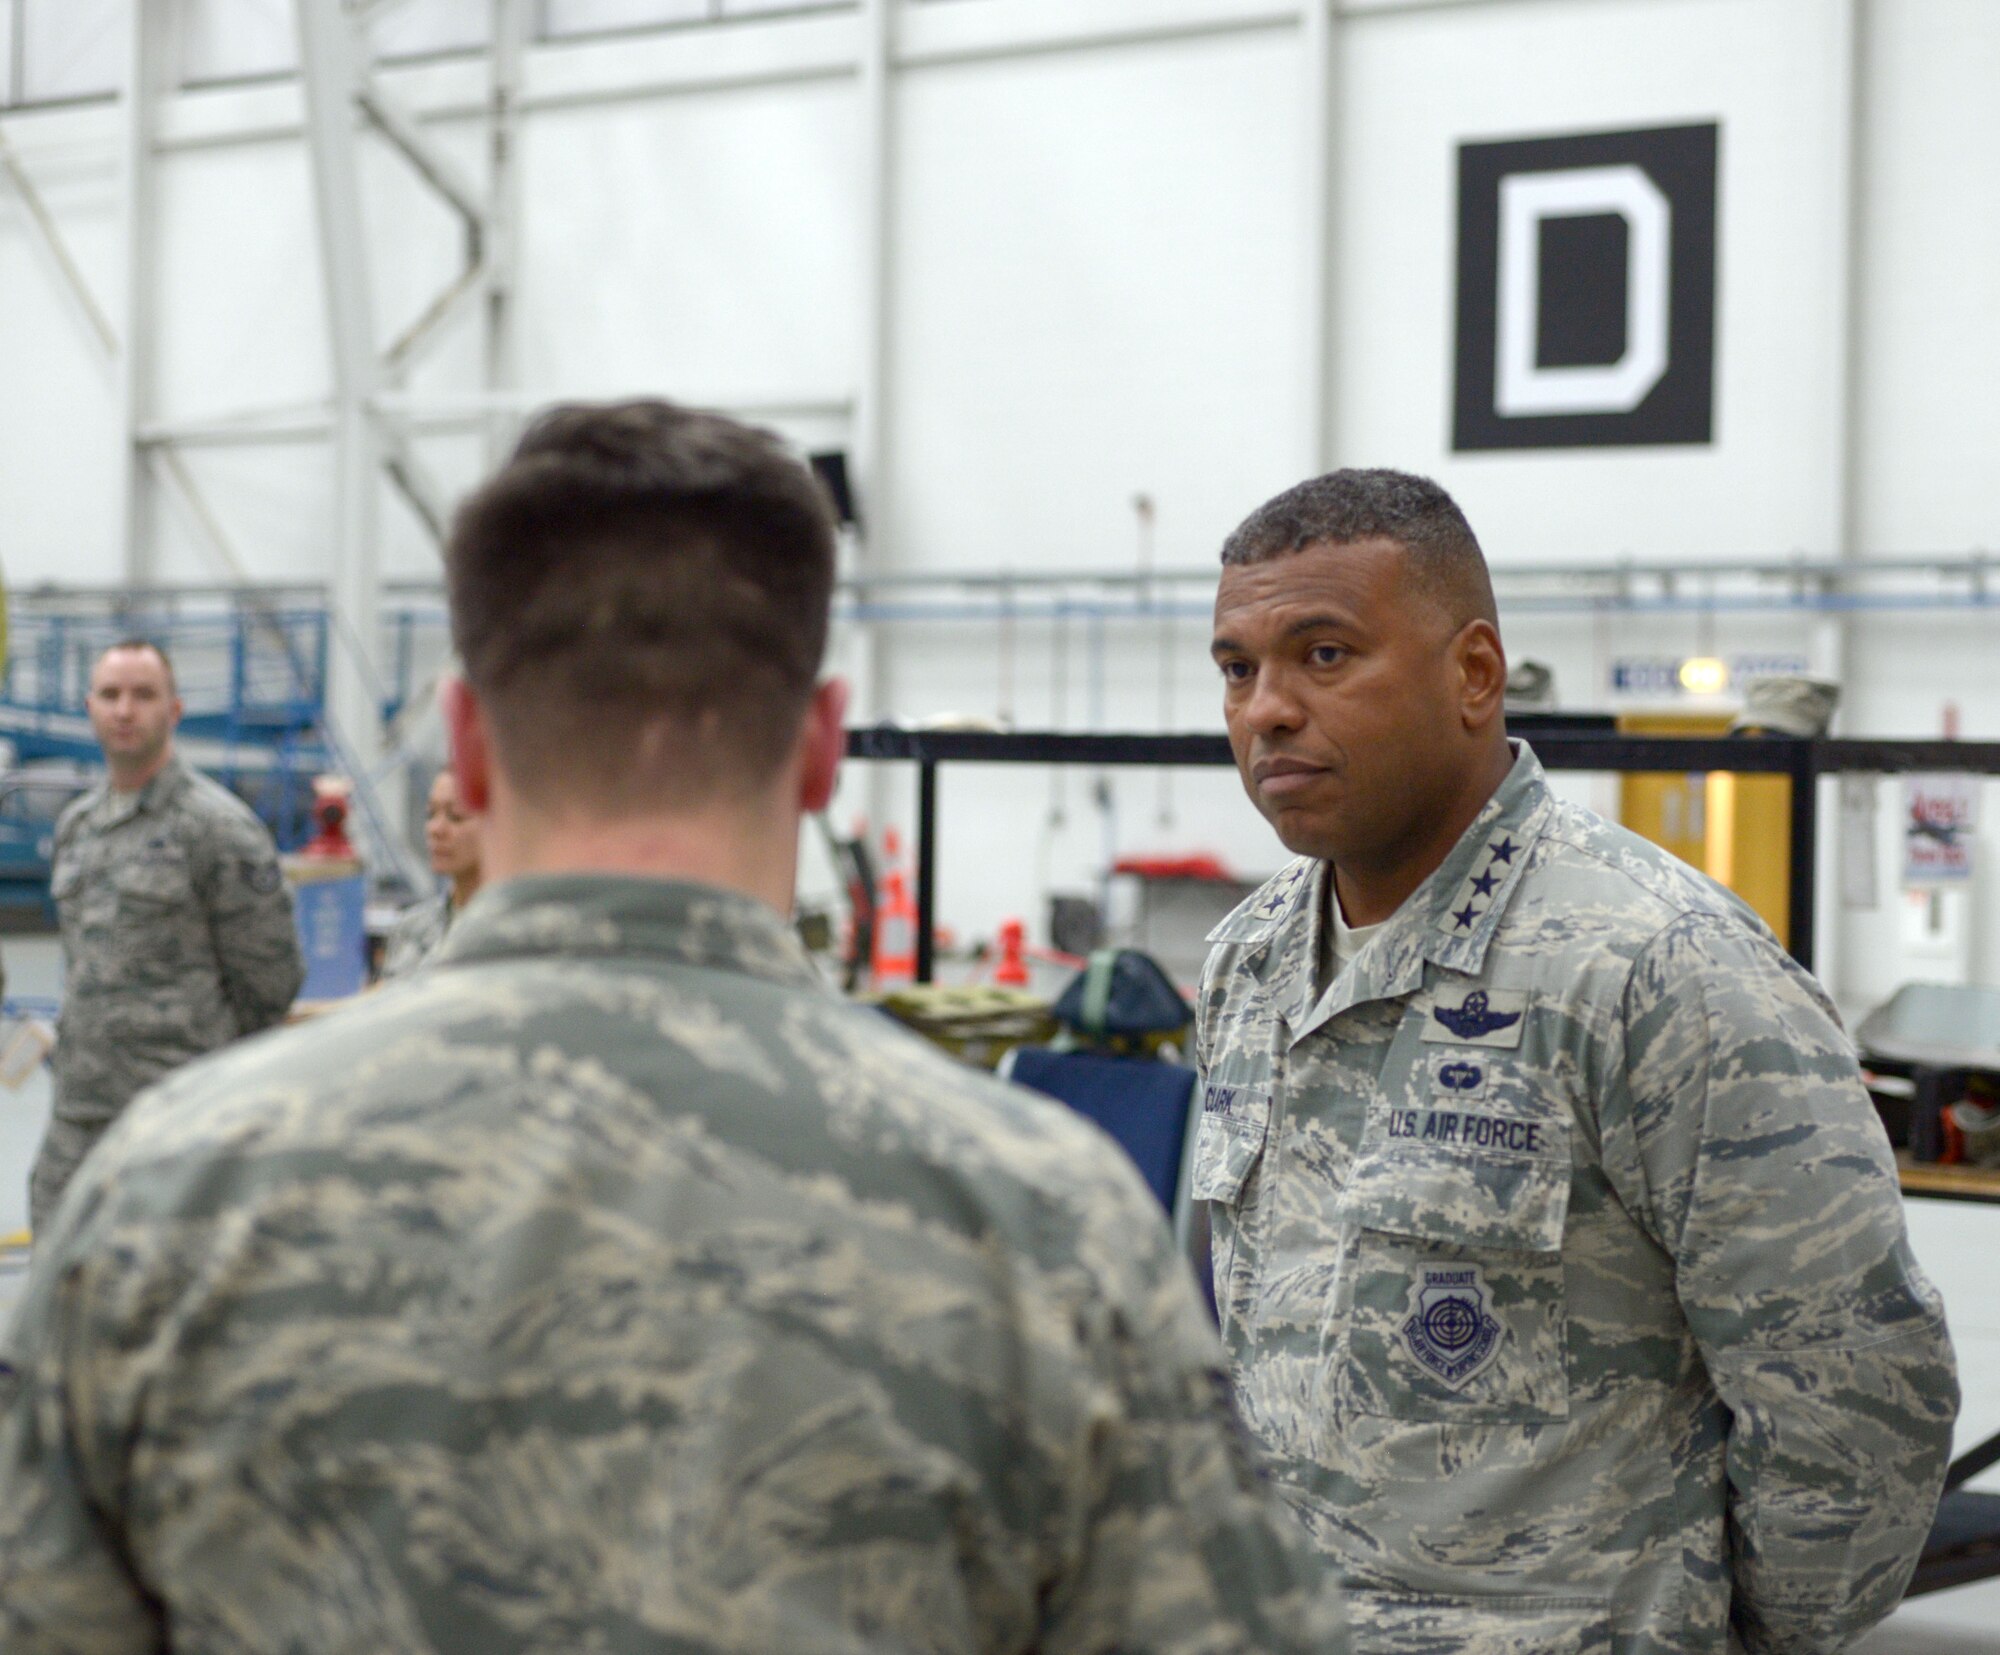 U.S. Air Force Lt. Gen. Richard M. Clark, 3rd Air Force commander, tours the 100th Maintenance Squadron Nov. 6, 2017, on RAF Mildenhall, England. Clark met with Airmen from the 100th MXS and learned about how their duties affect the mission of the 100th Air Refueling Wing. (U.S. Air Force photo by Airman 1st Class Benjamin Cooper)